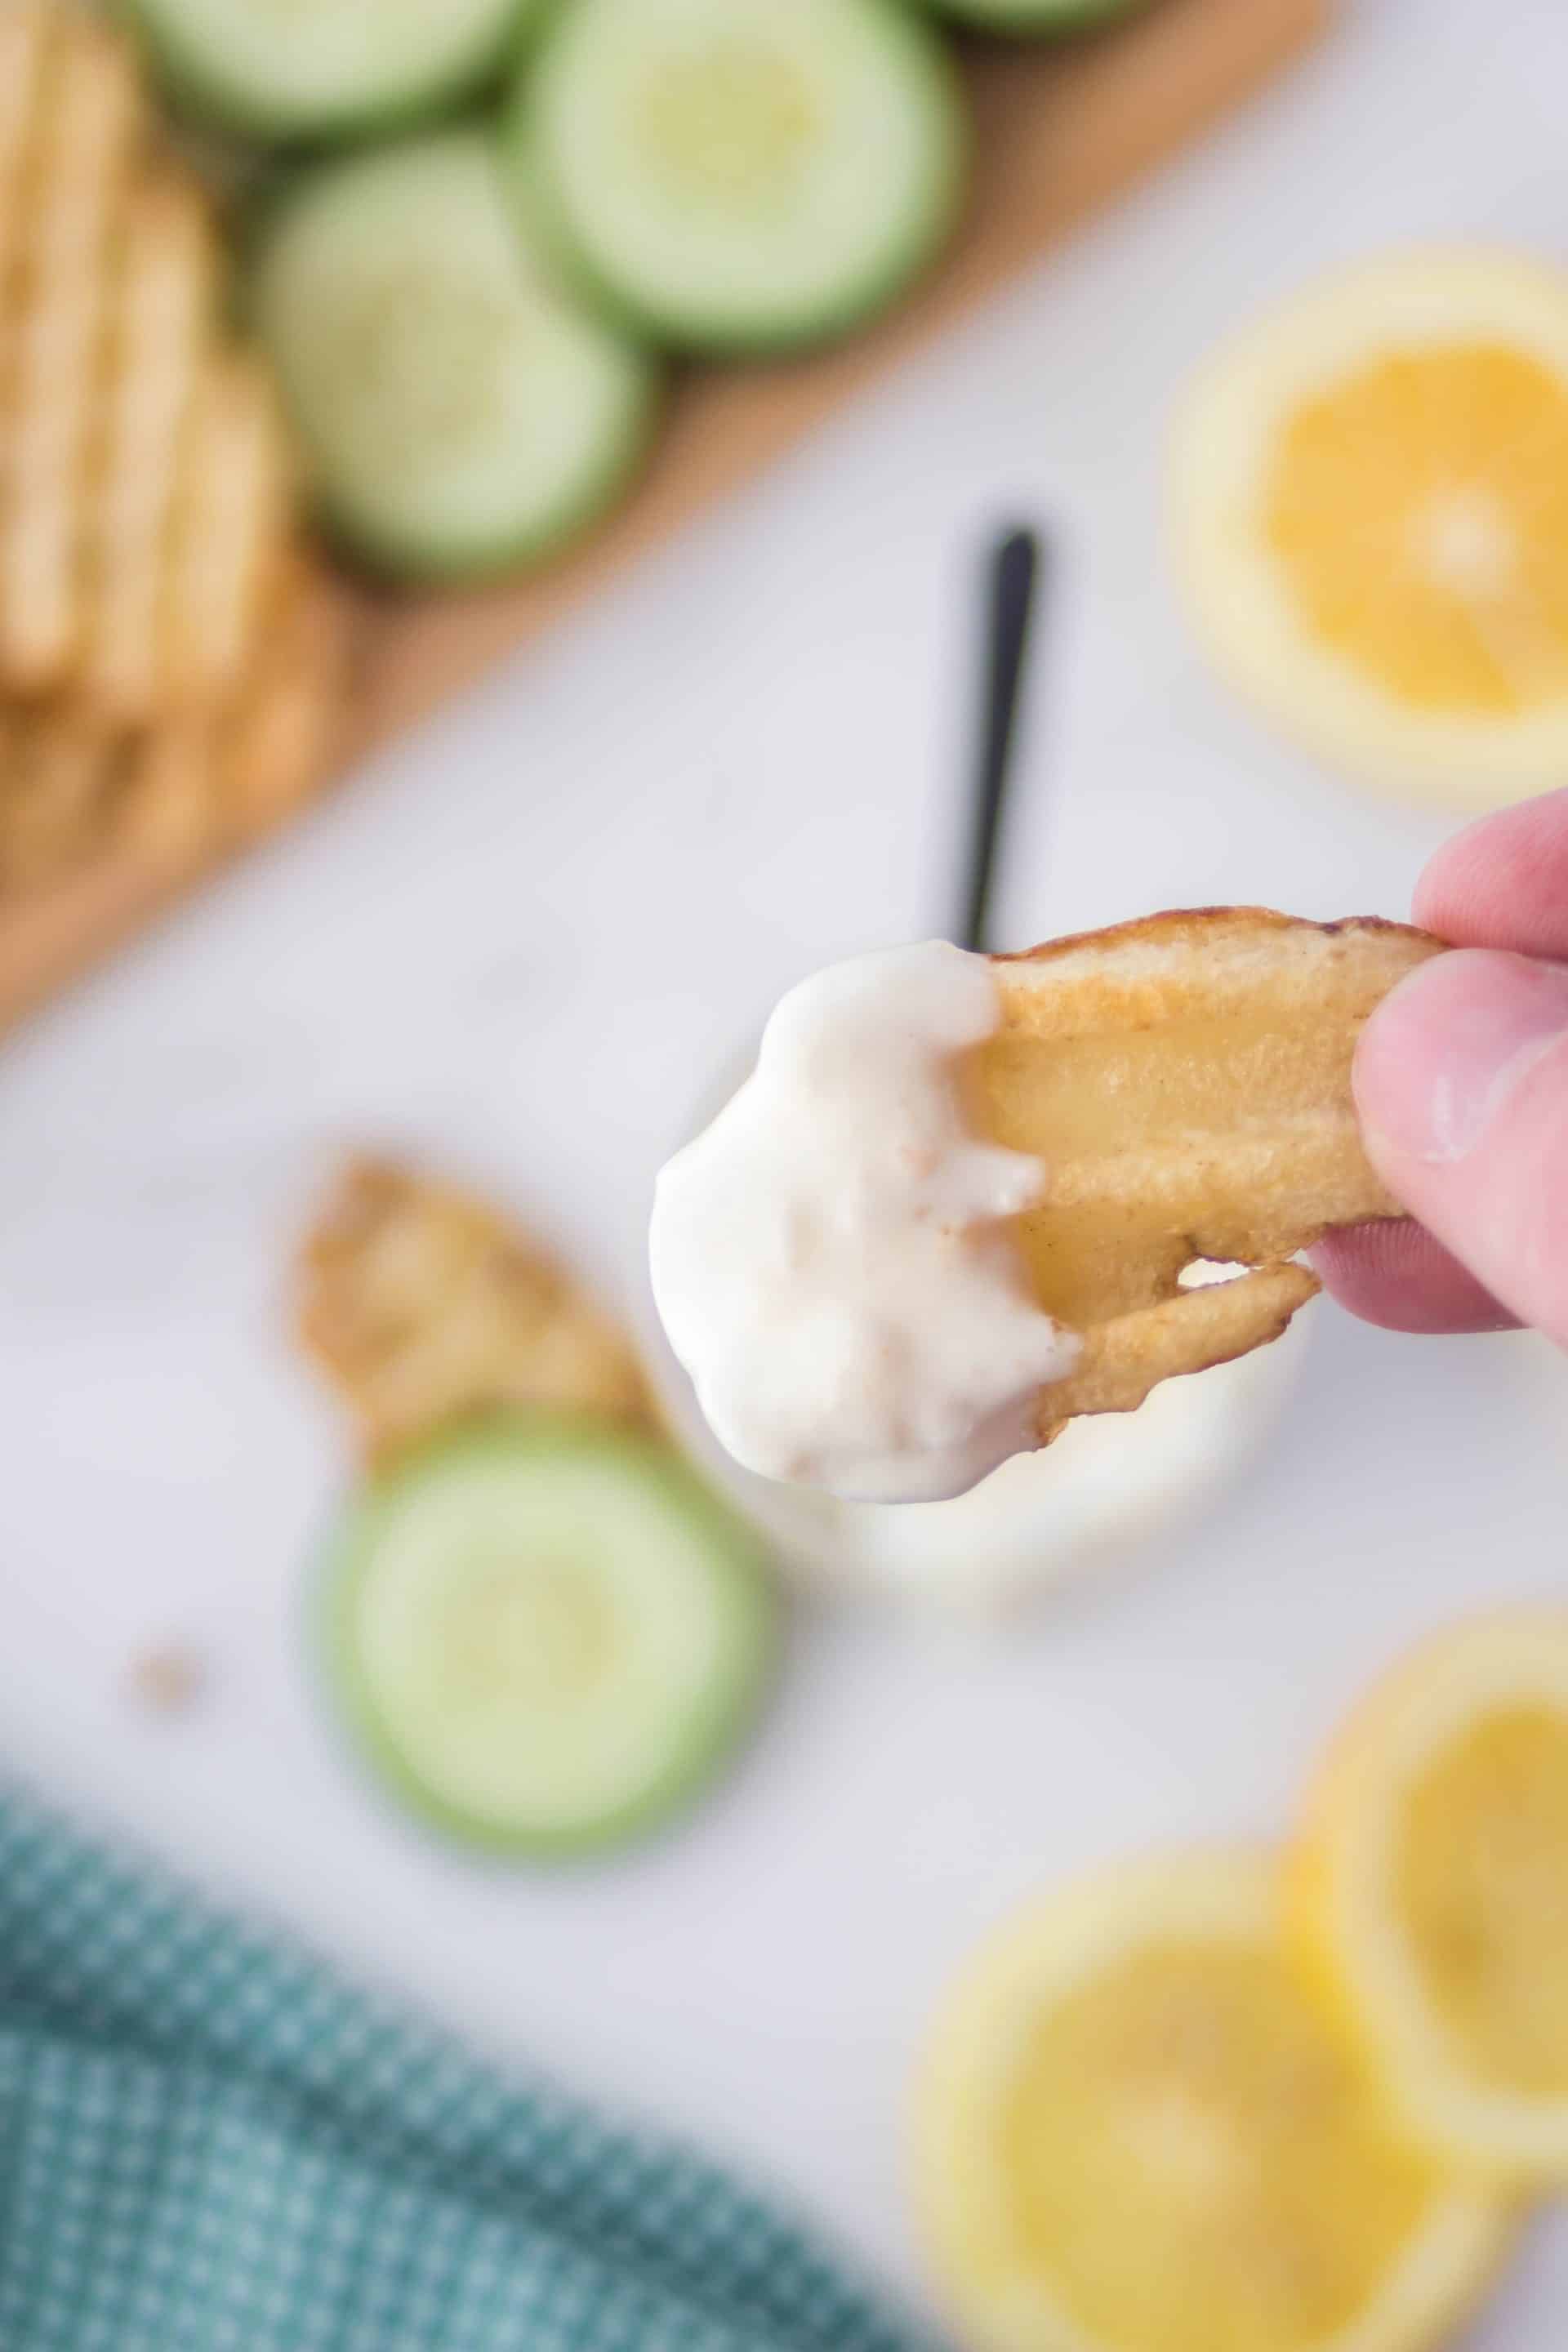 A hand holding a potato chip dipped in lemon aioli over a jar of more sauce